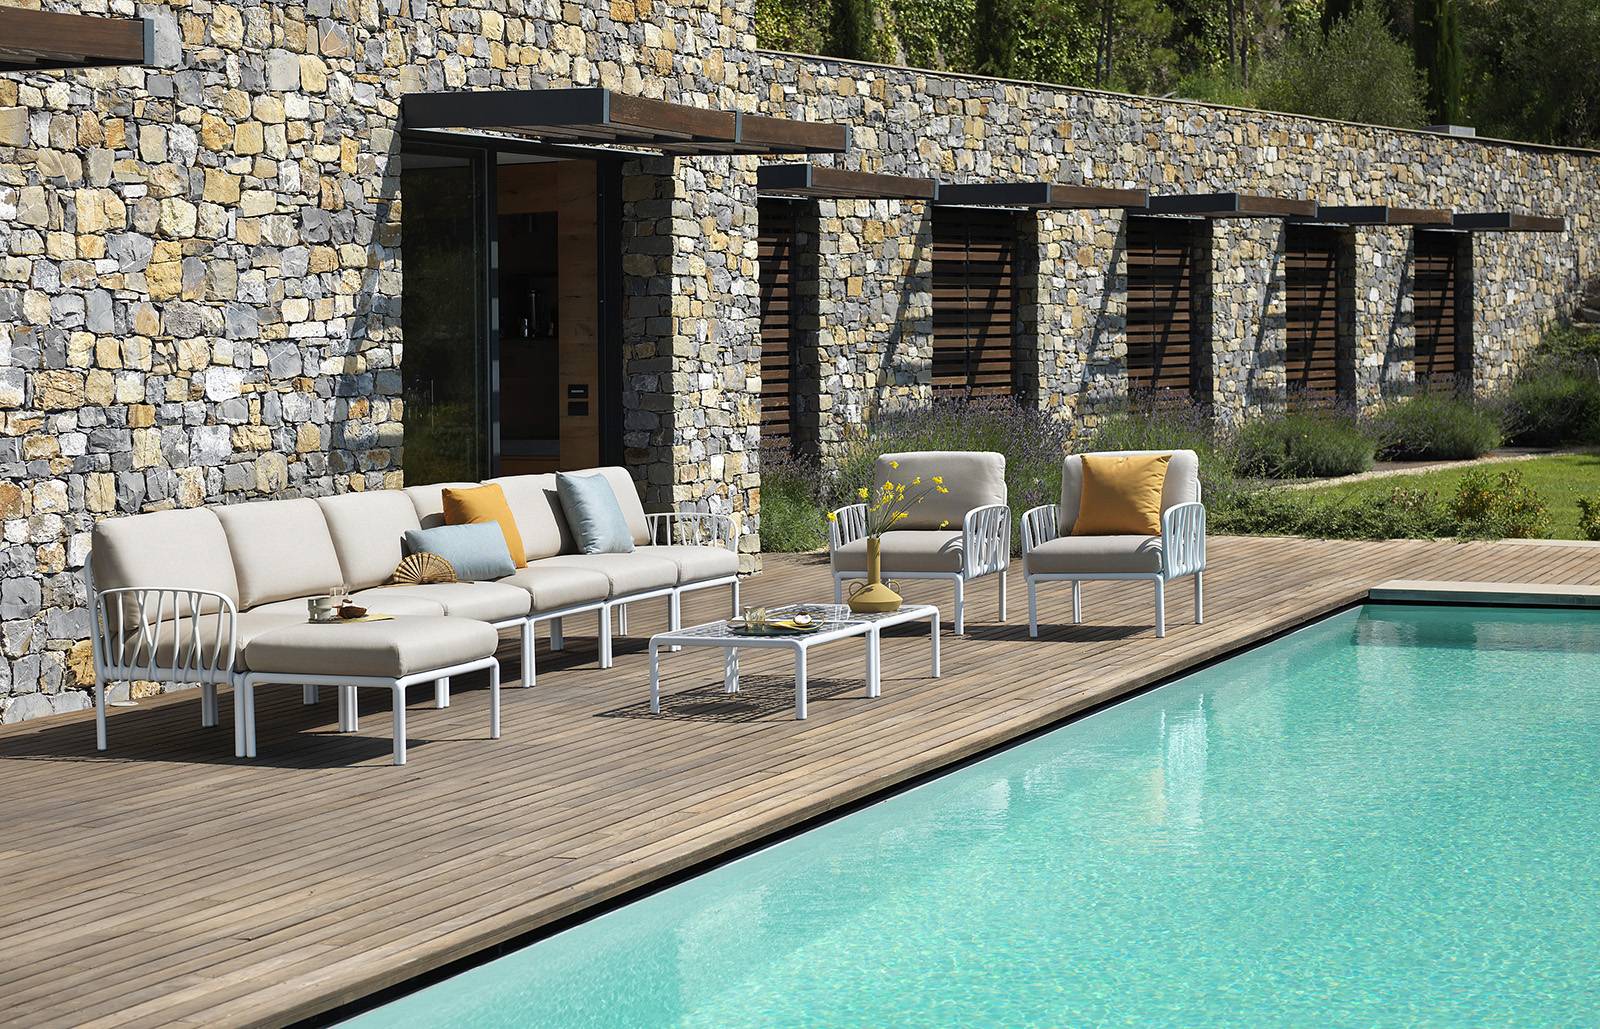 Komodo Outdoor Chair, white frame, grey cushion around the pool by a stonen wall